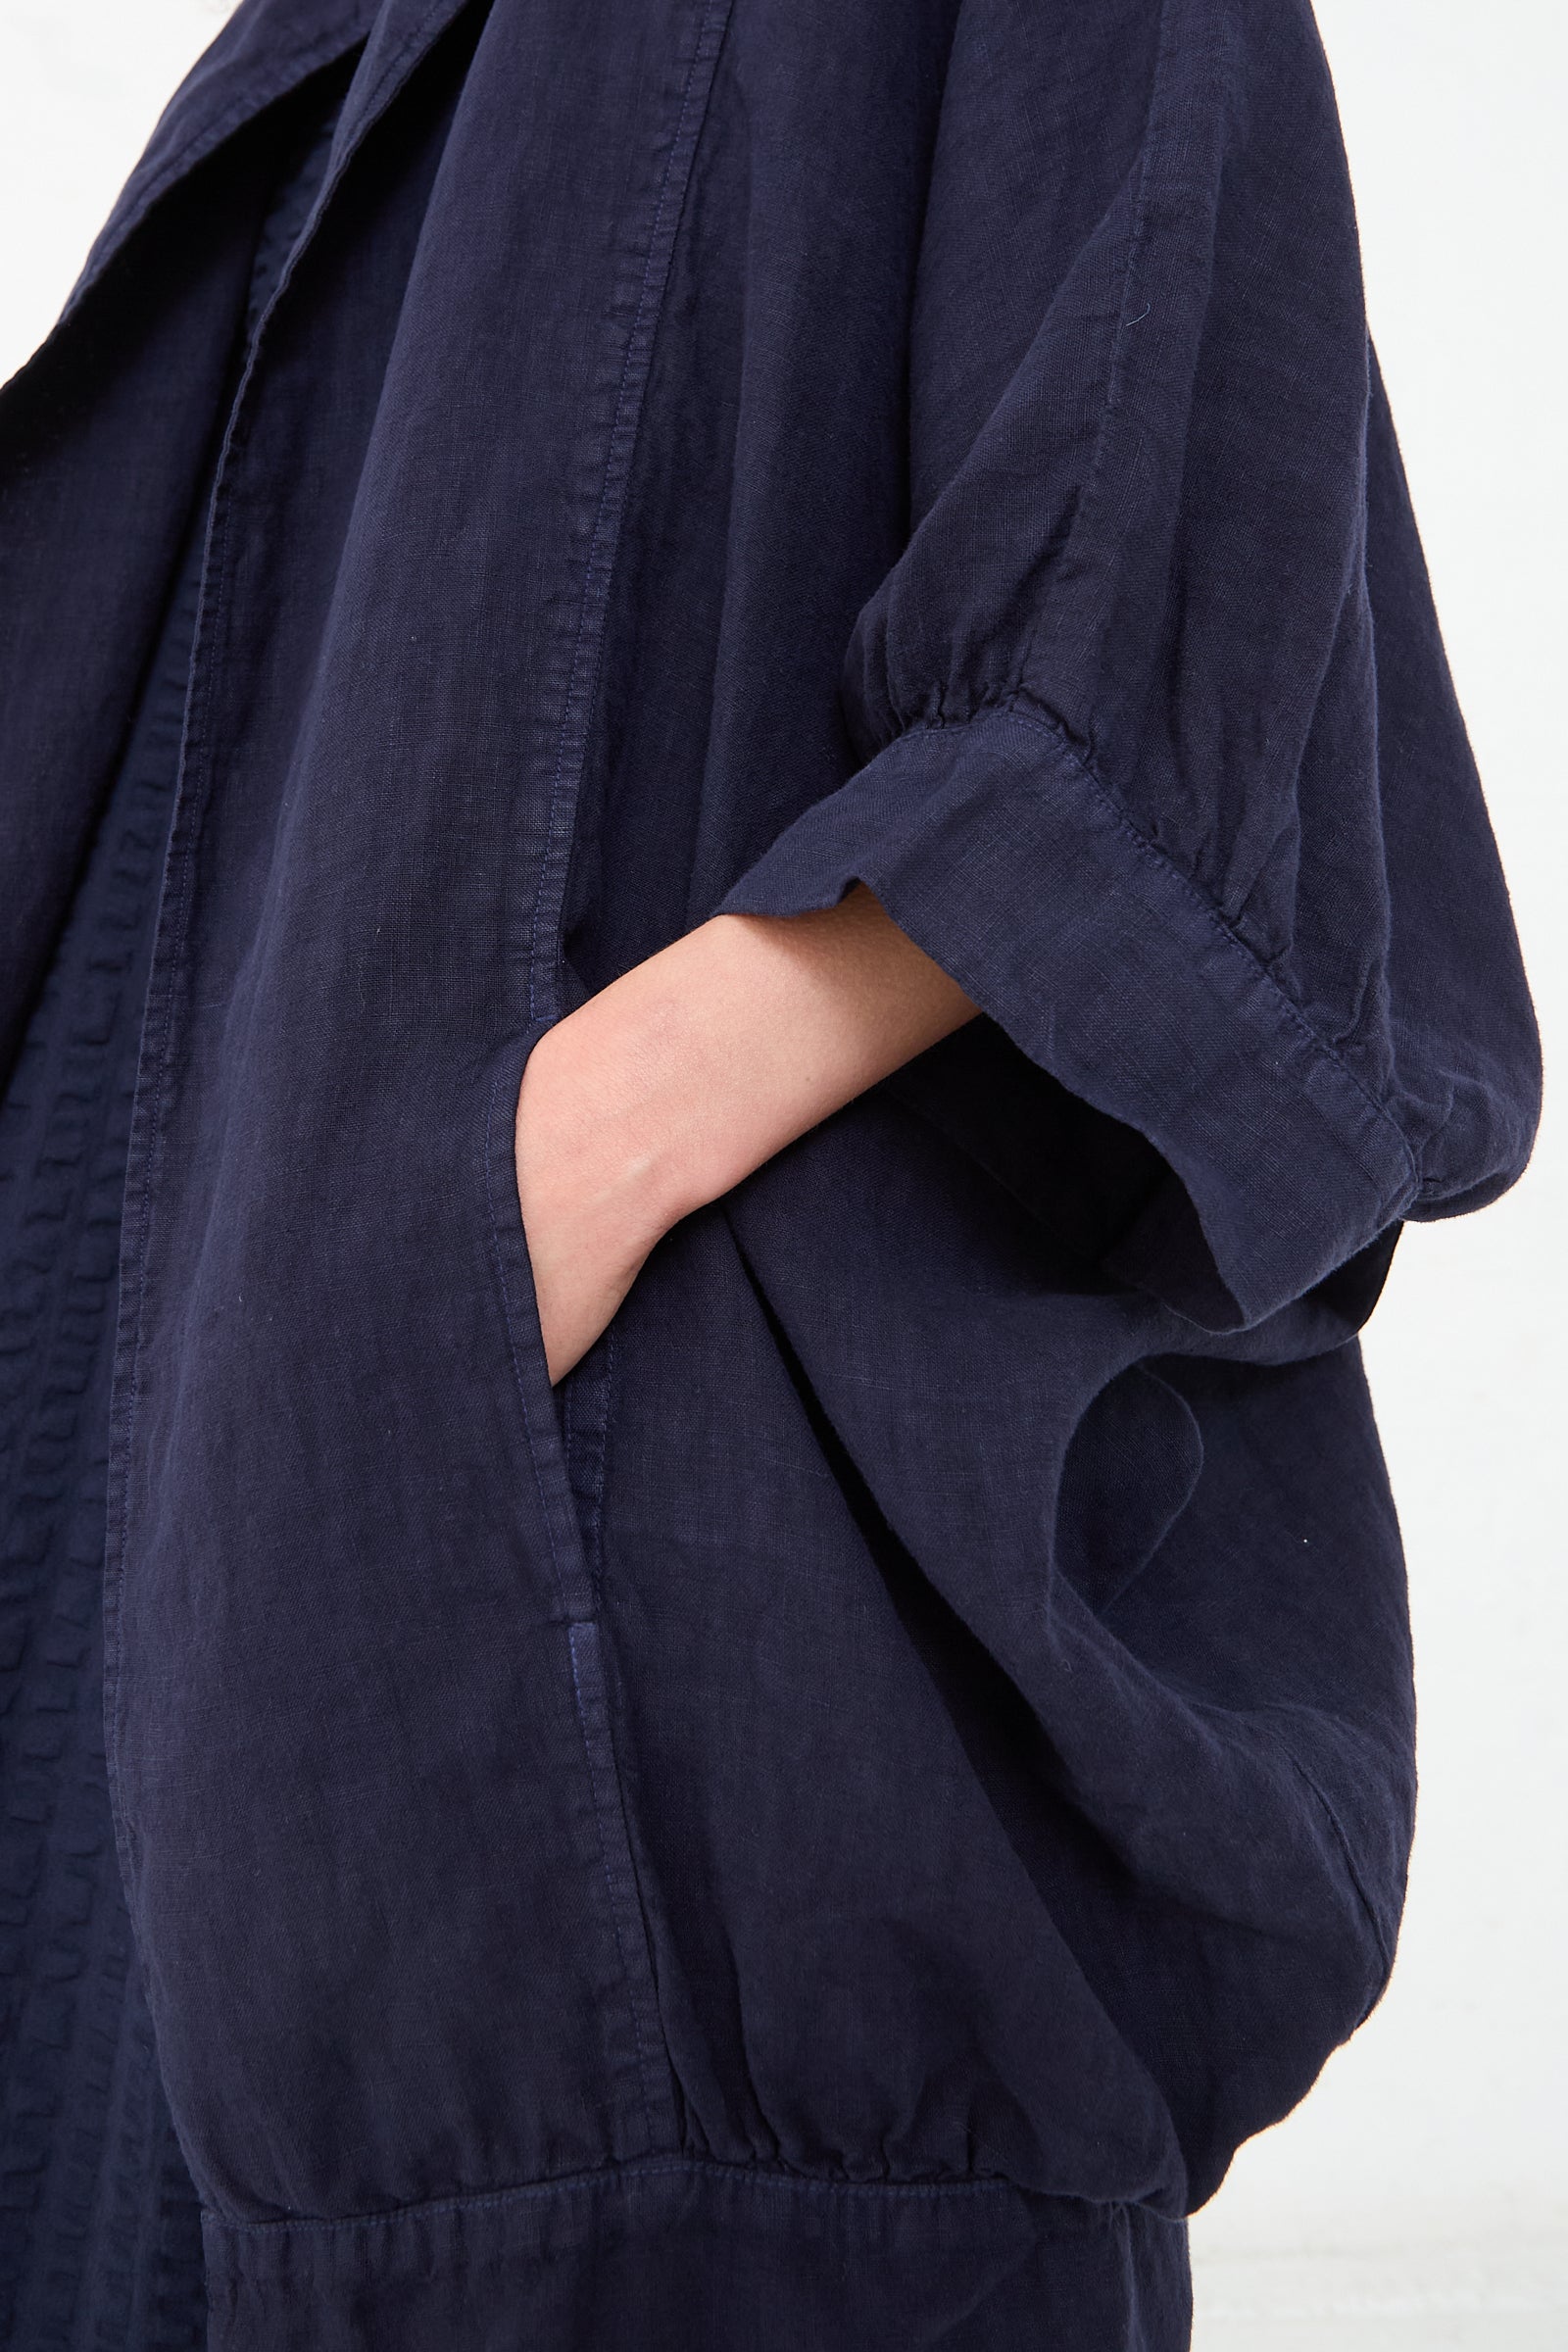 A person in a Linen Spoon Jacket in Indigo from Black Crane with a hand casually placed in a pocket.